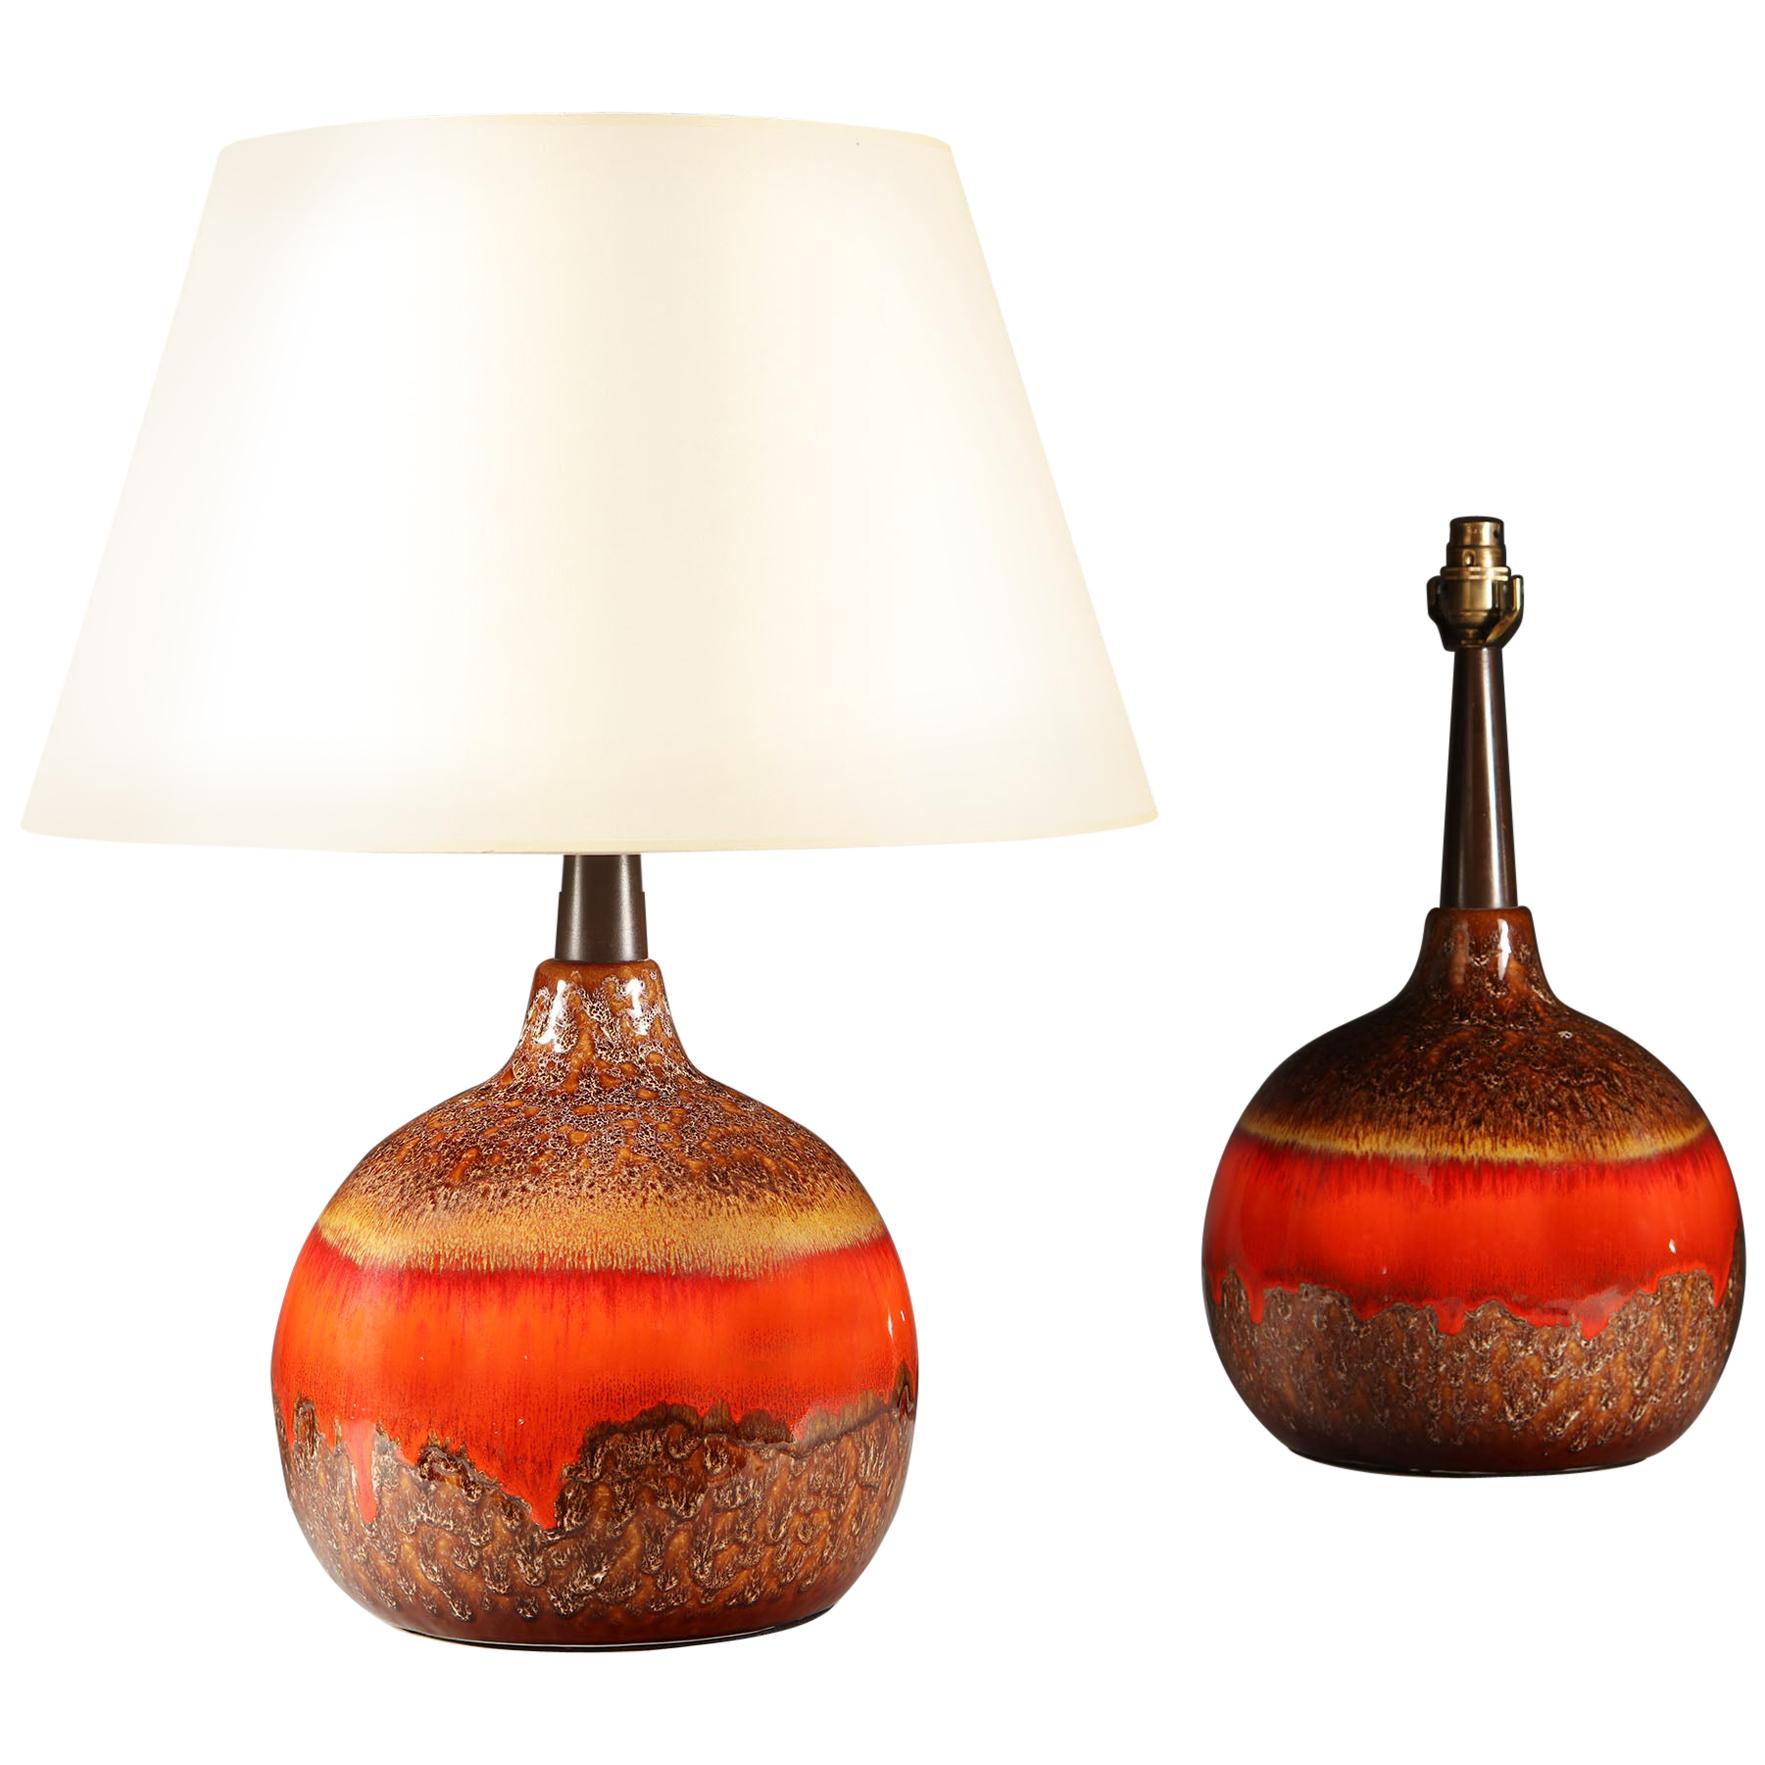 Pair of Orange Volcanic Glaze Art Pottery Vases as Table Lamps